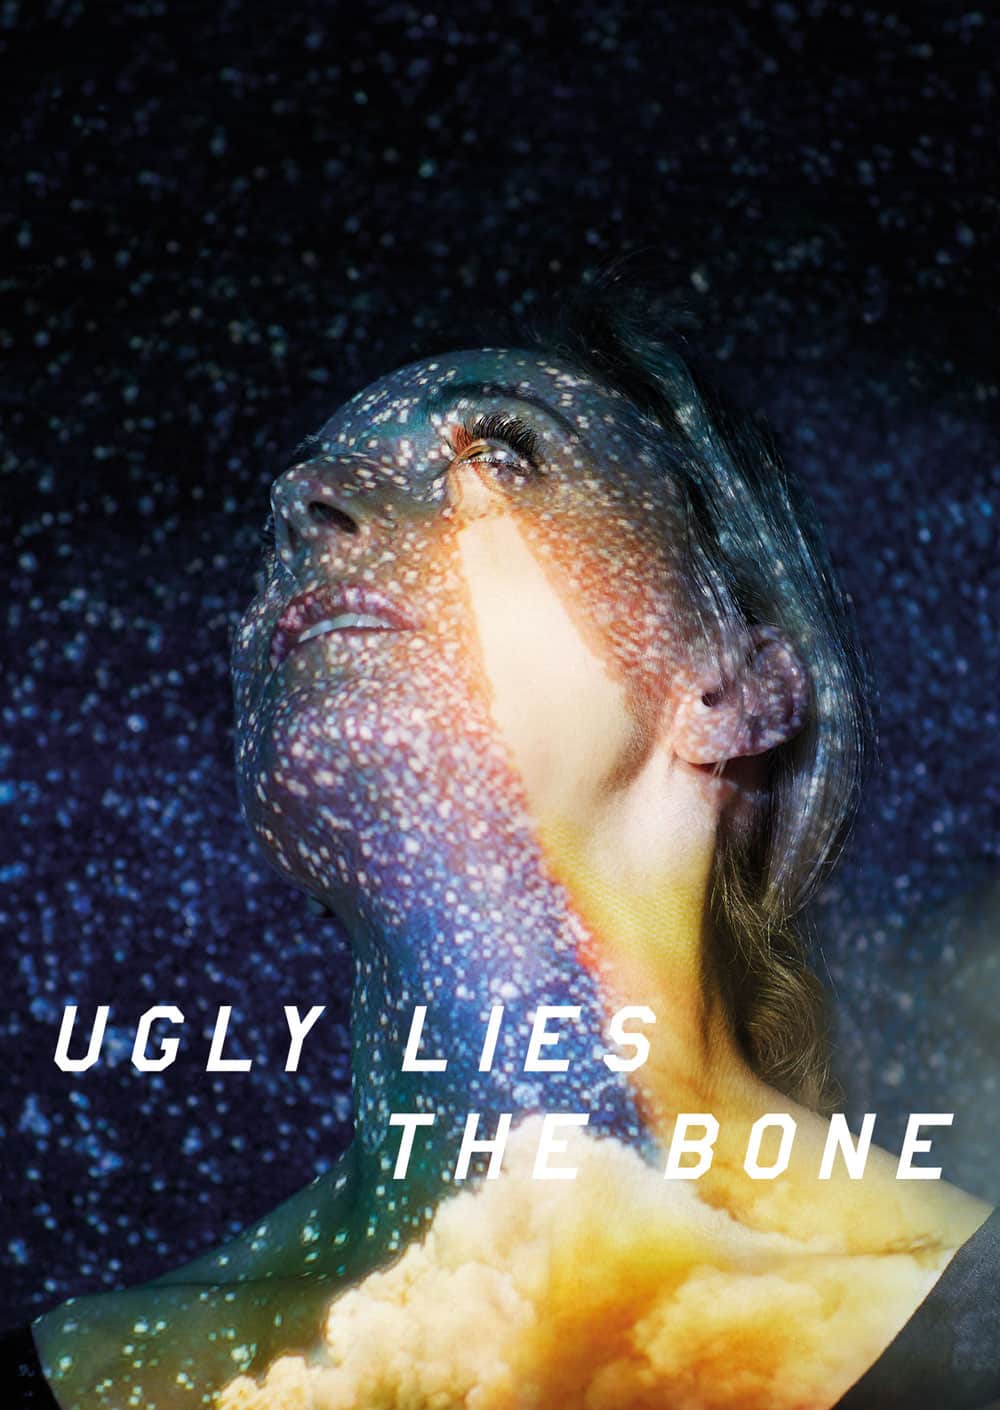 Ugly Lies The Bone at the National Theatre